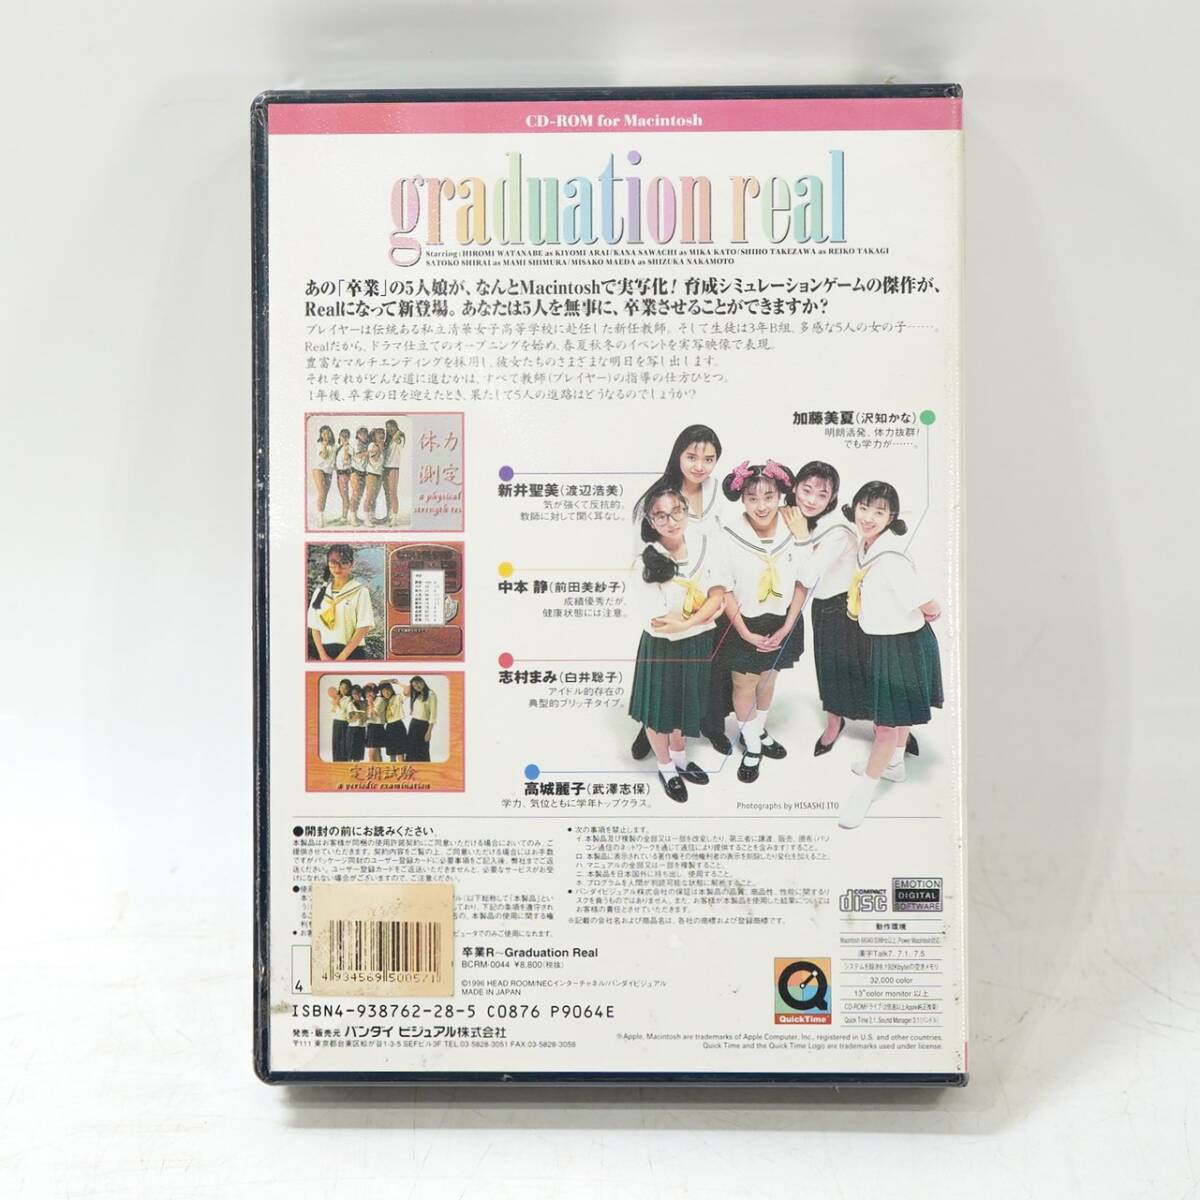 1 jpy start new goods unused super rare PC-FX. industry R ~Graduation Real~ retro rare Hudson GAME game YW178